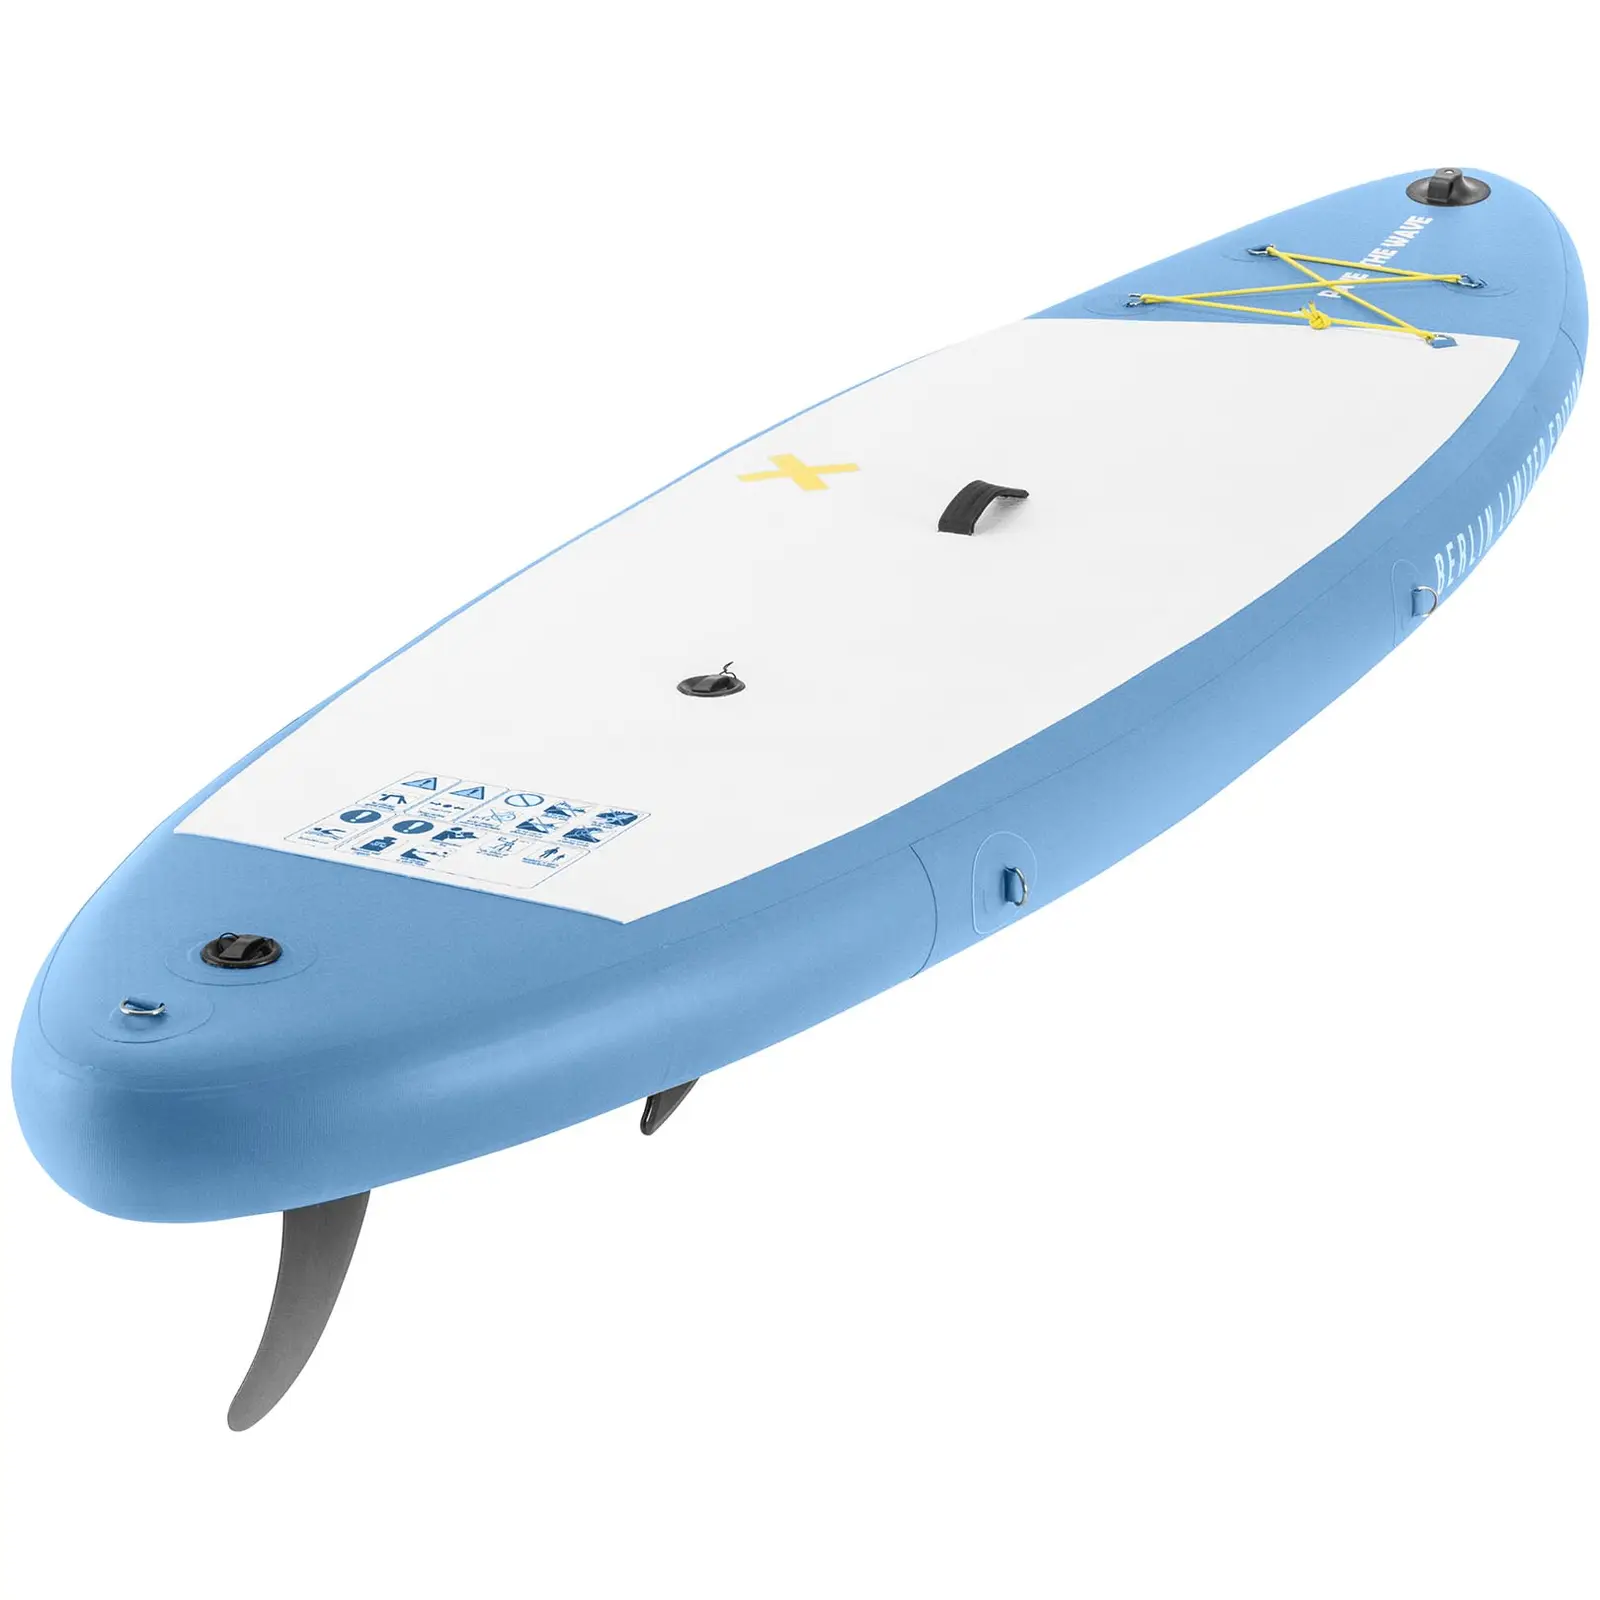 Inflatable paddle board - inflatable - 105 kg - light blue- double chamber - 302 x 81 x 38 cm